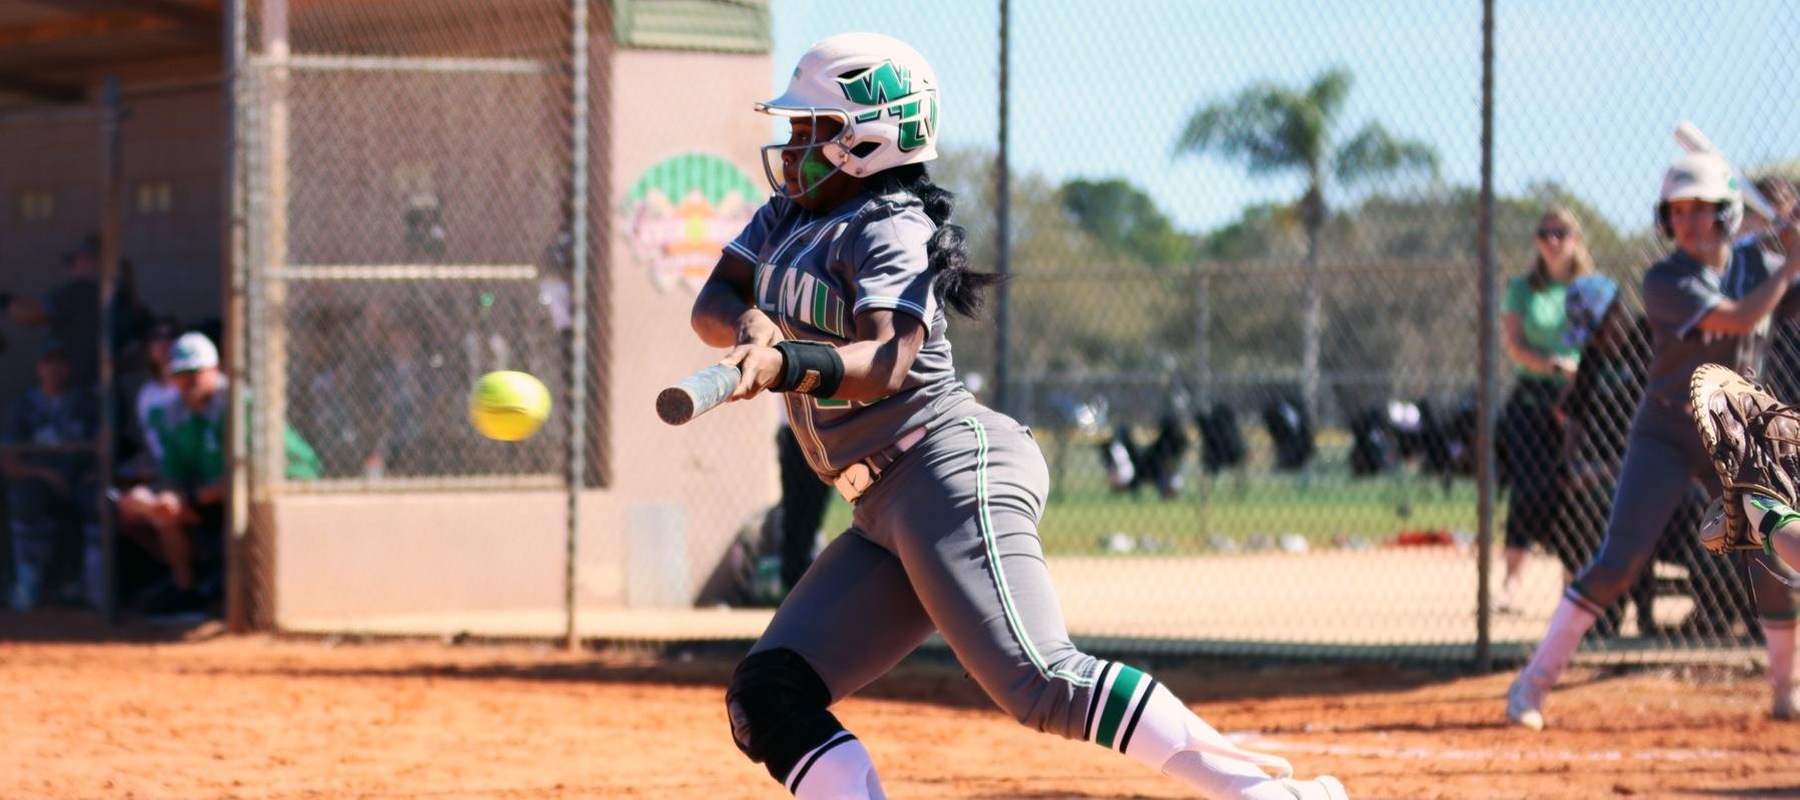 Copyright 2020. Wilmington University. All rights reserved. Photo by Mary Kate Rumbaugh. March 1, 2020 vs. Grand Valley State at Winter Haven Diamond Plex in Winter Haven, Florida.